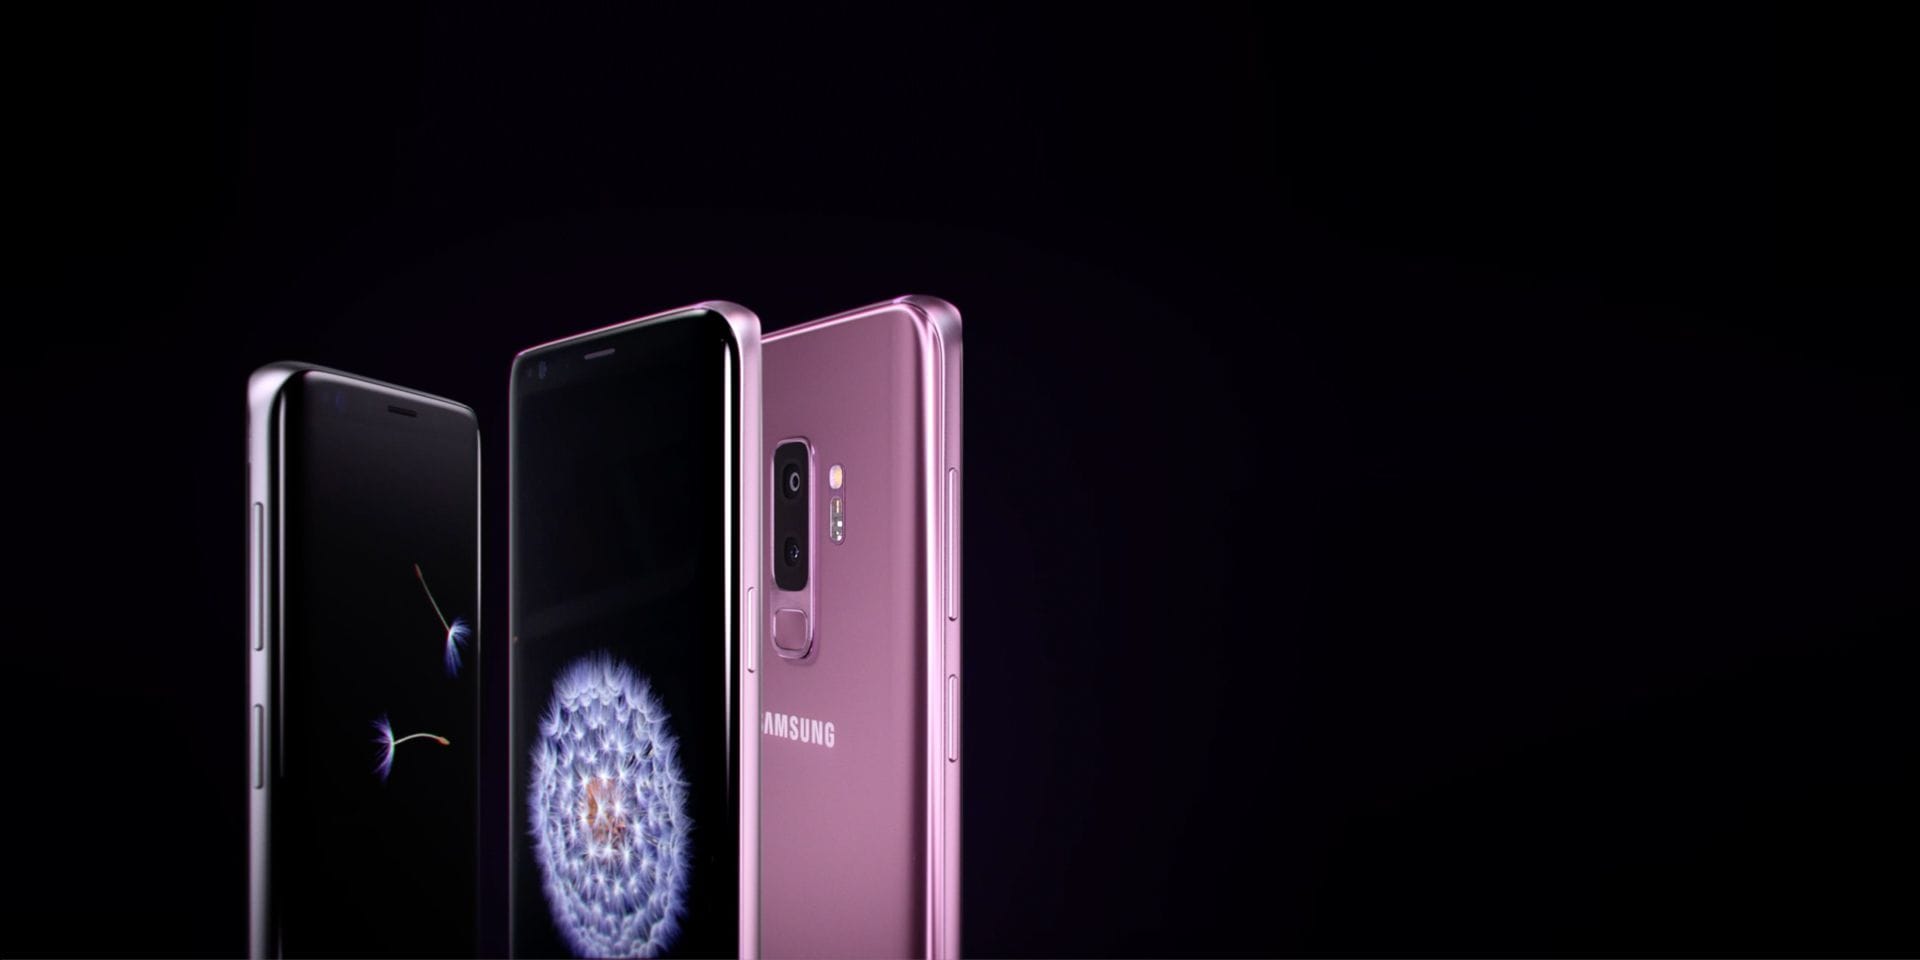 [Rolling out] Samsung details Galaxy S9 One UI 2.0 update release date in more markets across Europe & America